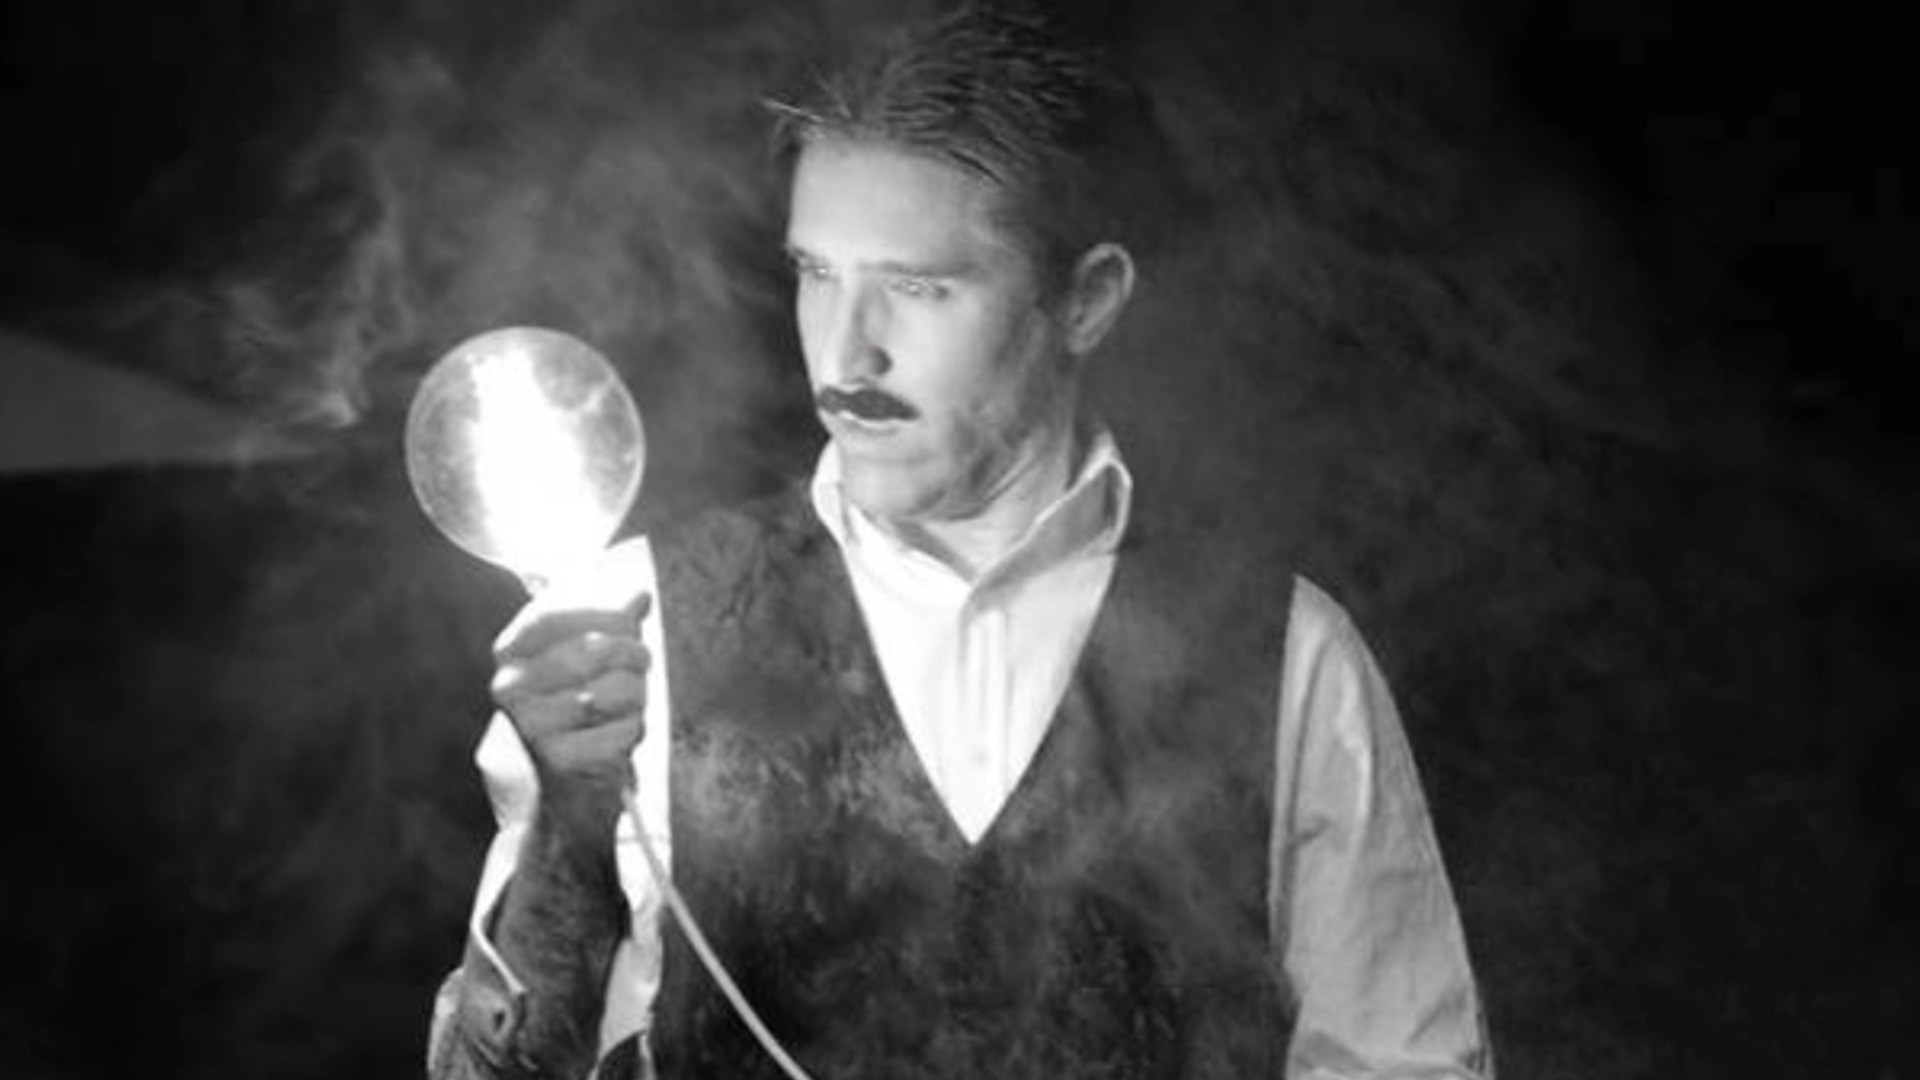 Remembering Nikola Tesla, the Genius Who Would've 165 Years Old Today -